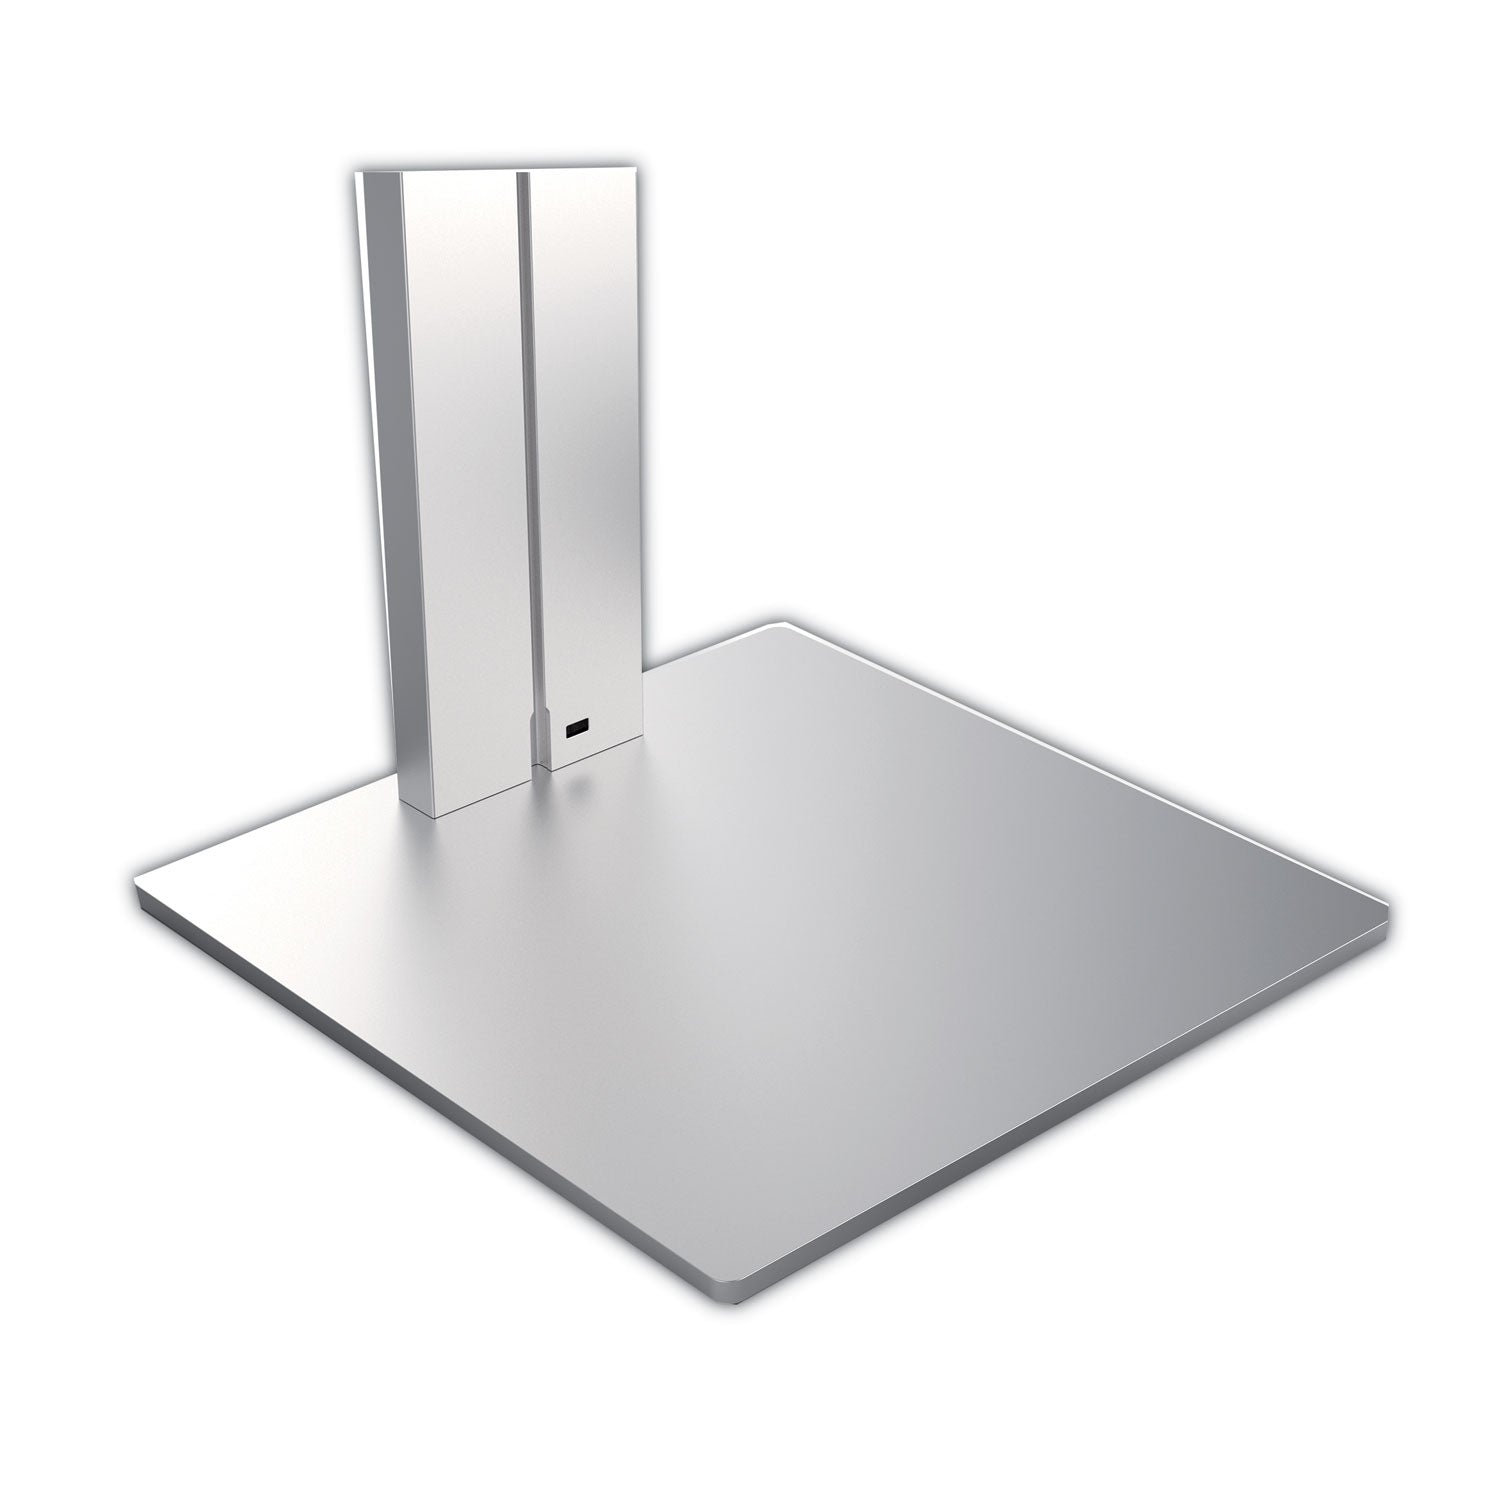 floor-stand-tablet-holder-silver-charcoal-gray_dbl893223 - 4